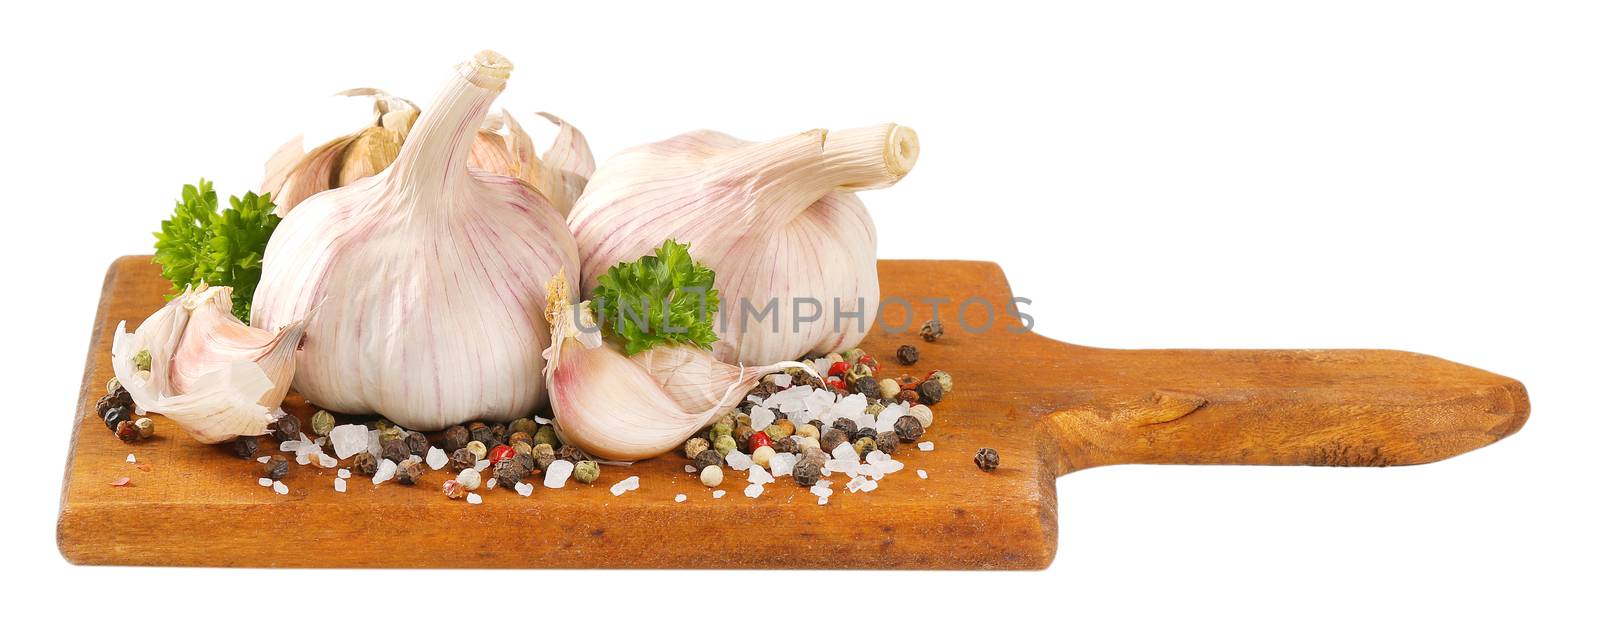 fresh garlic with spices by Digifoodstock